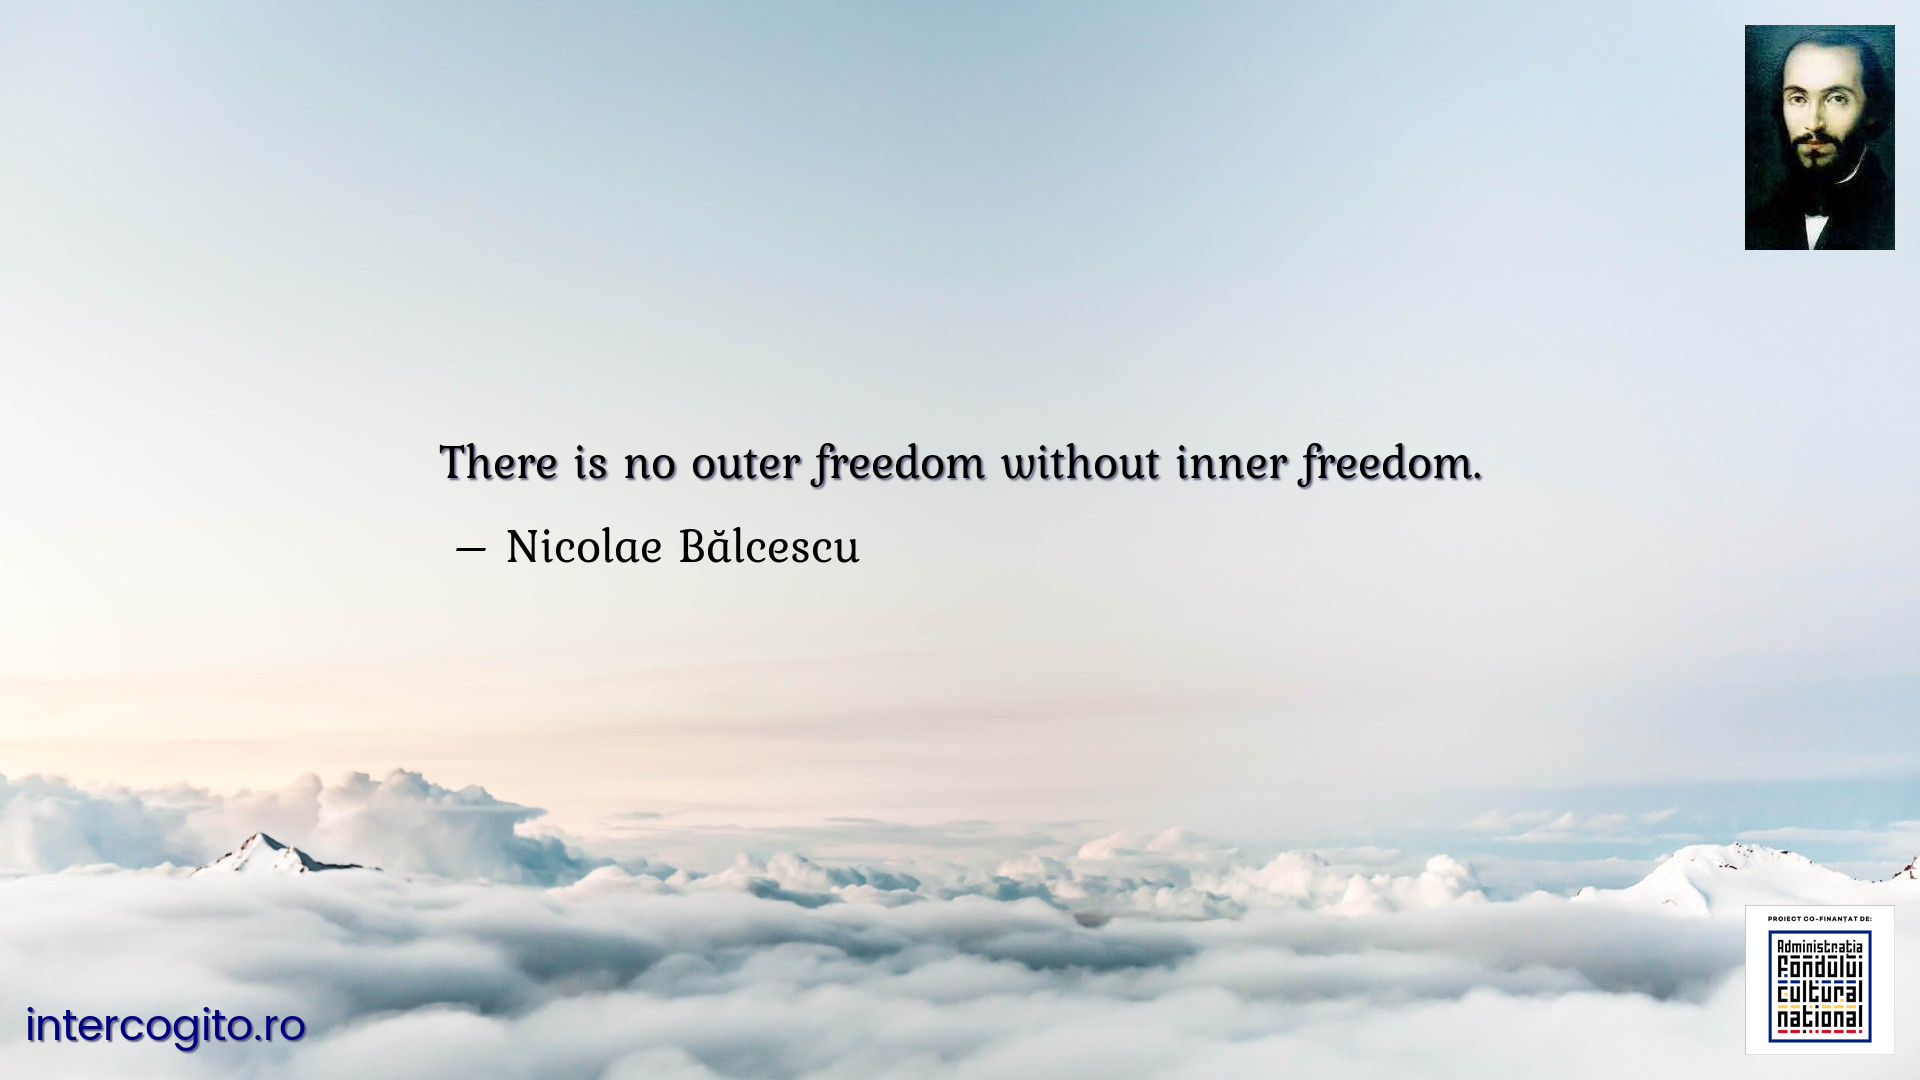 There is no outer freedom without inner freedom.